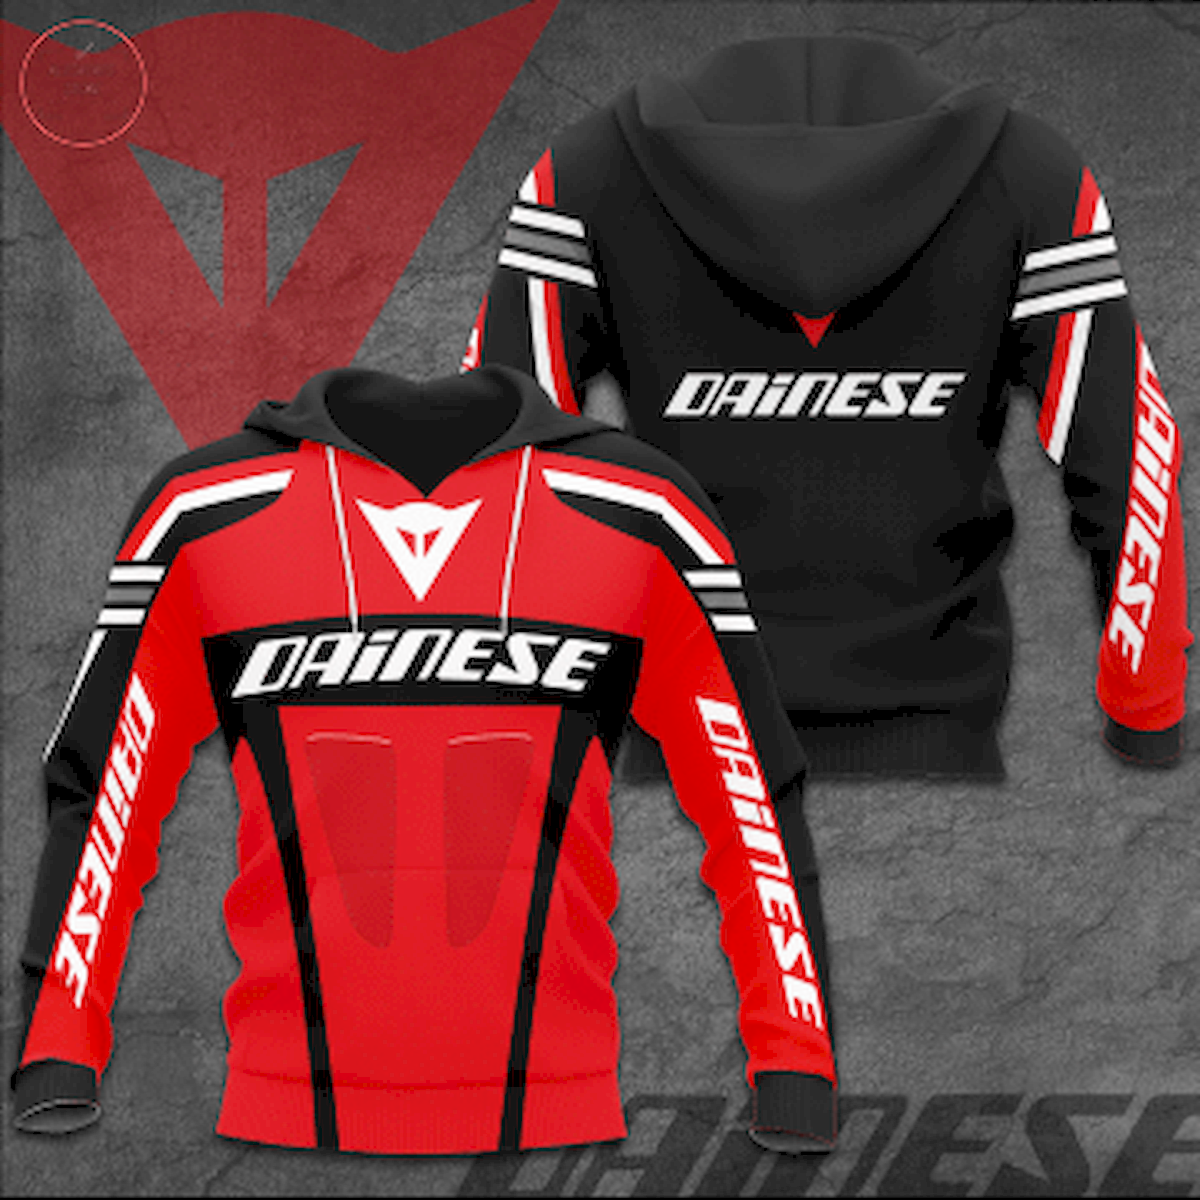 Dainese Racing Team All Over Printed Shirts